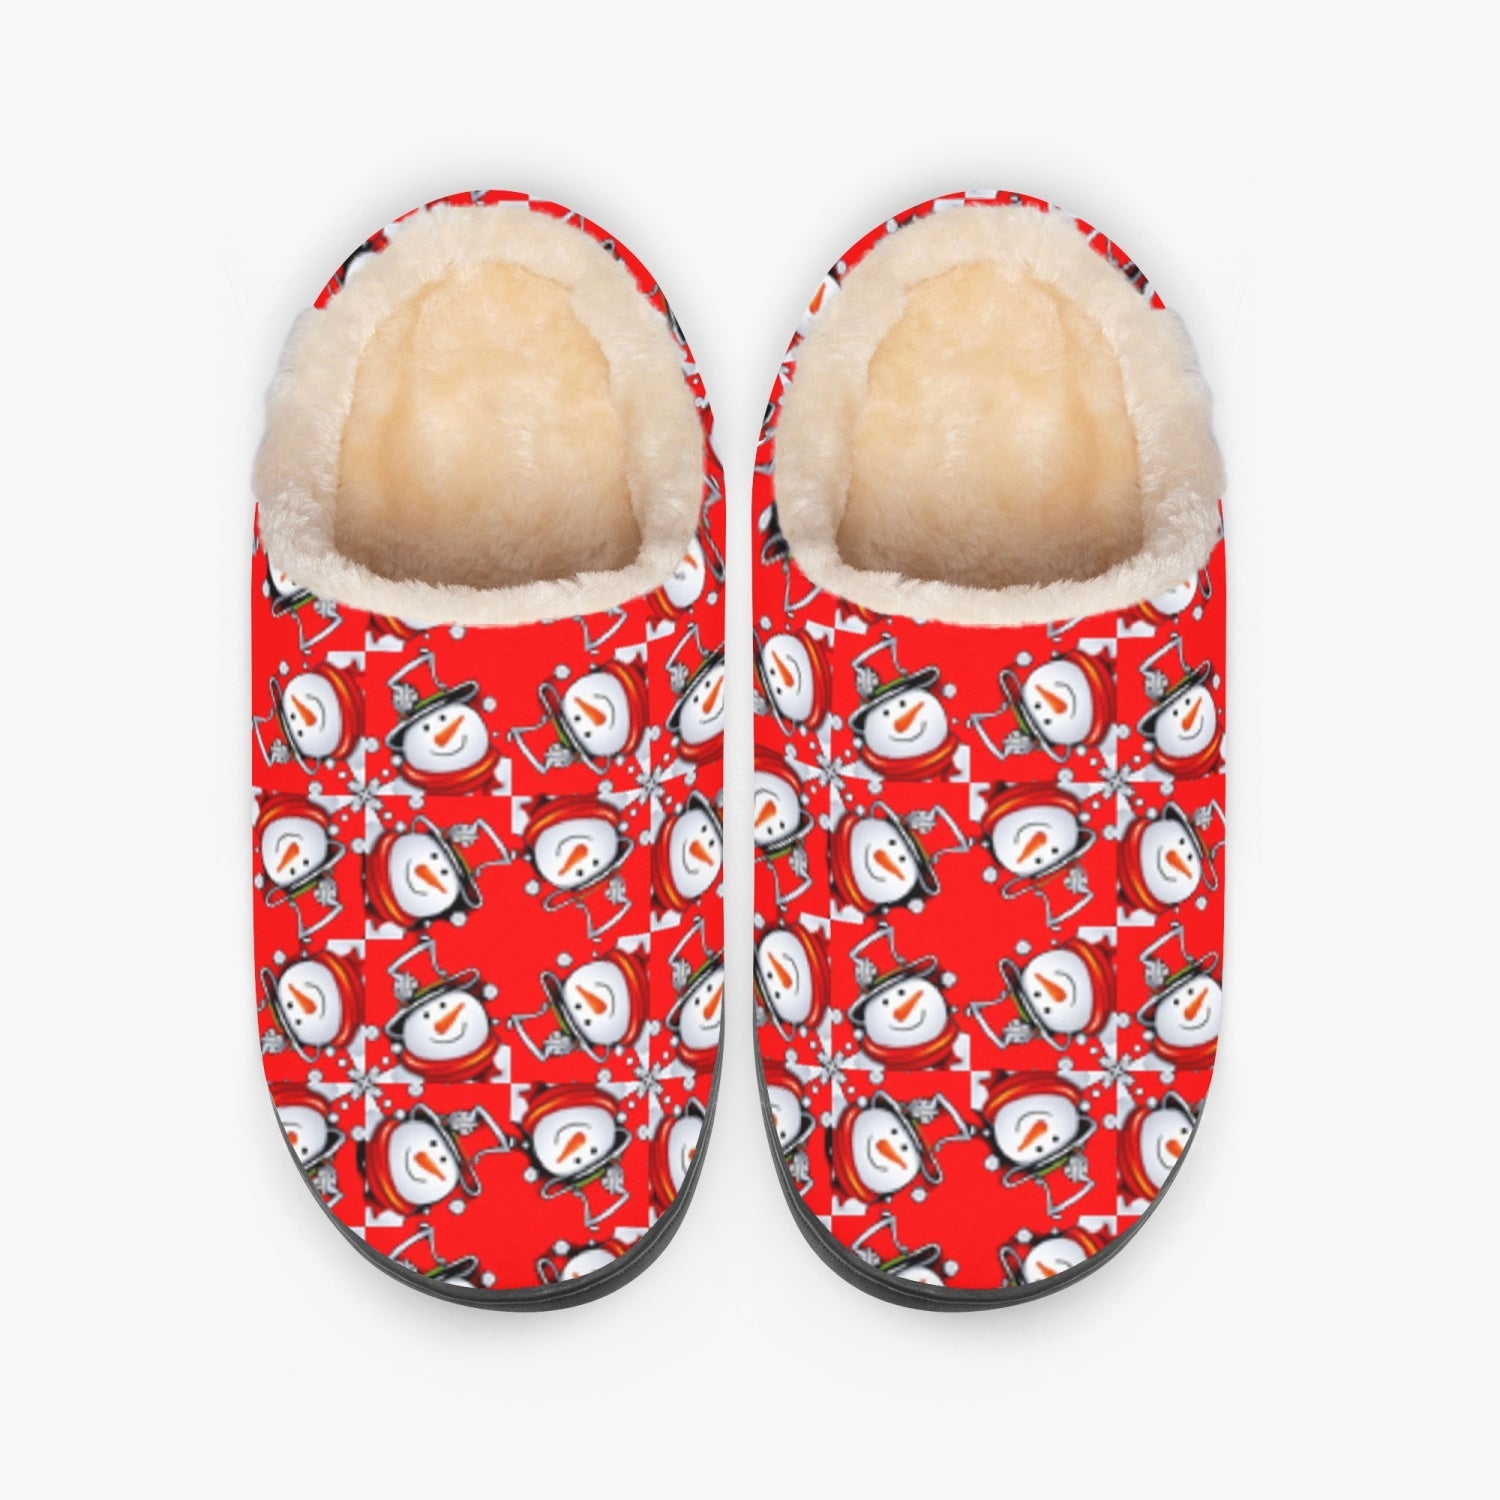 - Snow Man's Delight Fluffy Bedroom Christmas Slippers - unisex slippers at TFC&H Co.